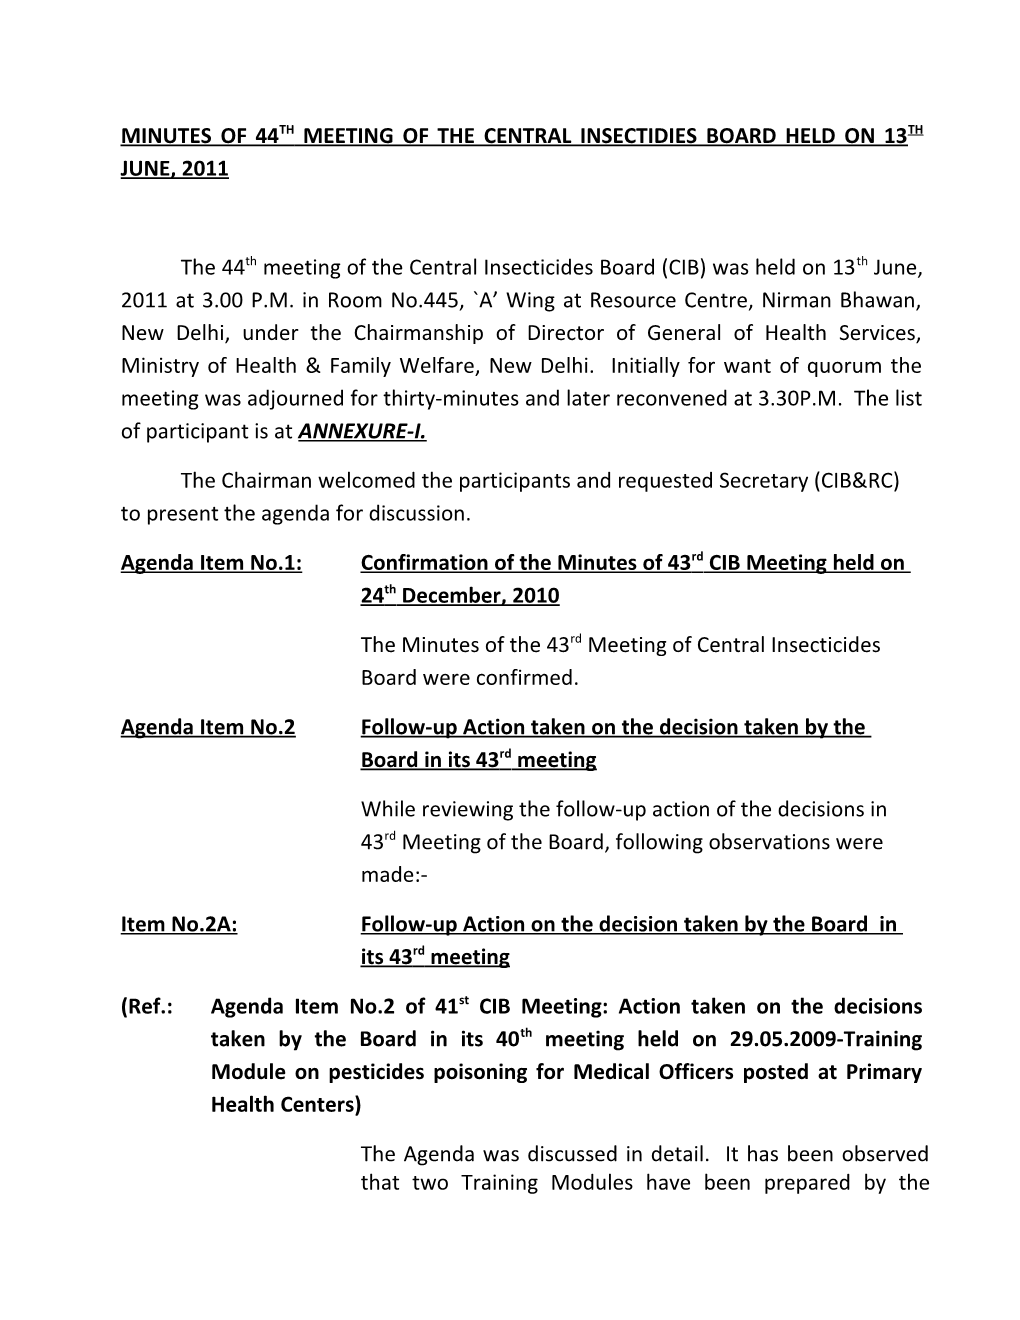 Minutes of 44Th Meeting of the Central Insectidies Board Held on 13Th June, 2011